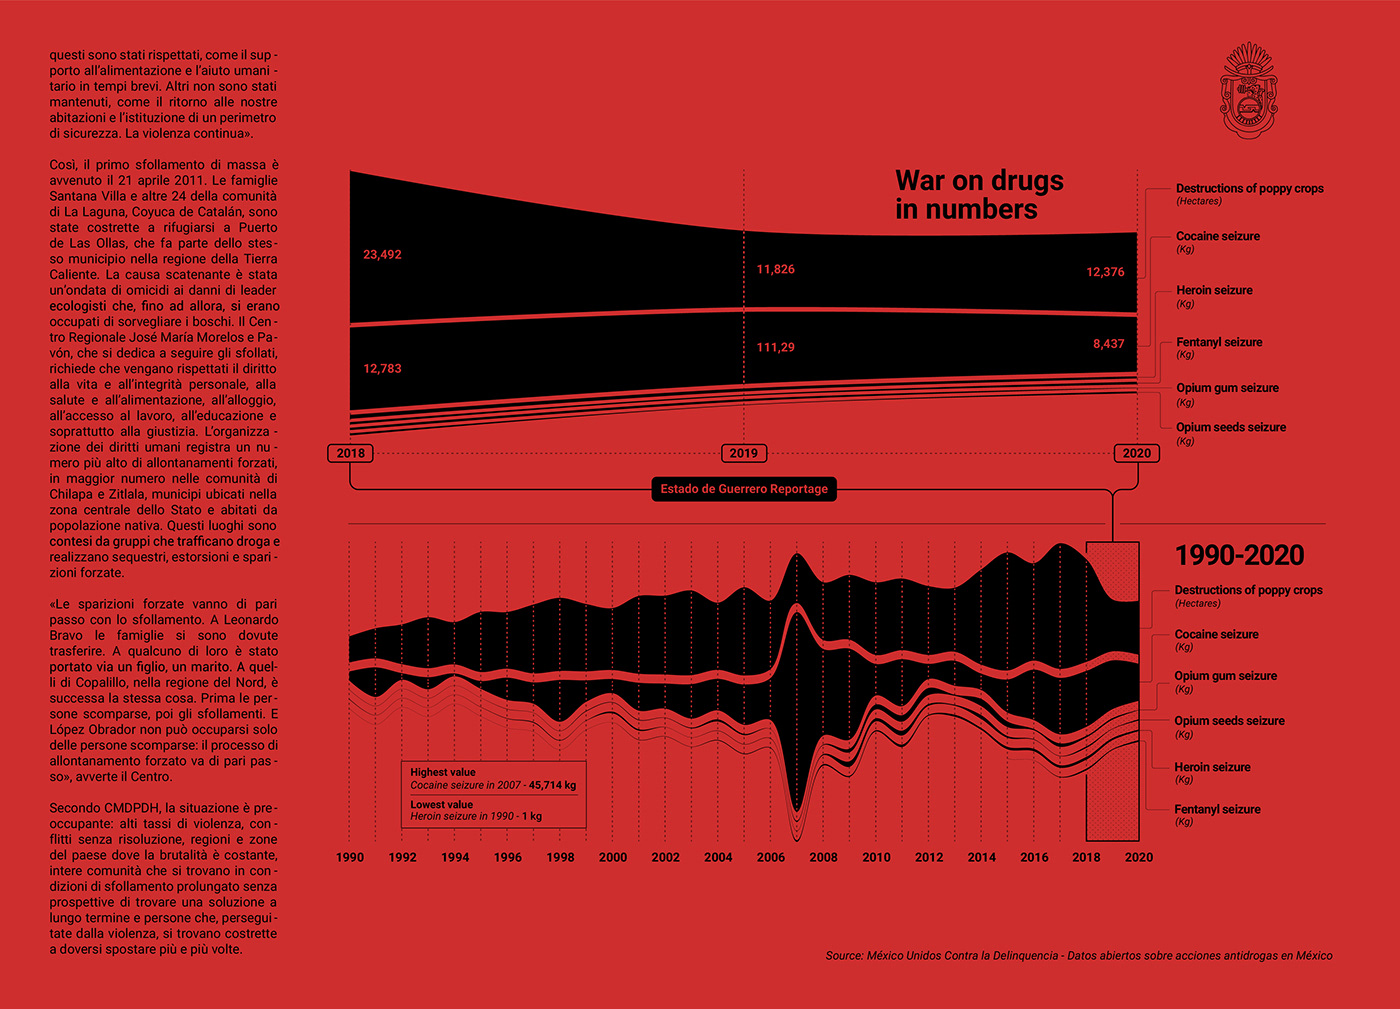 book Data data visualisation Drugs infographic information design mexico Photography  print reportage